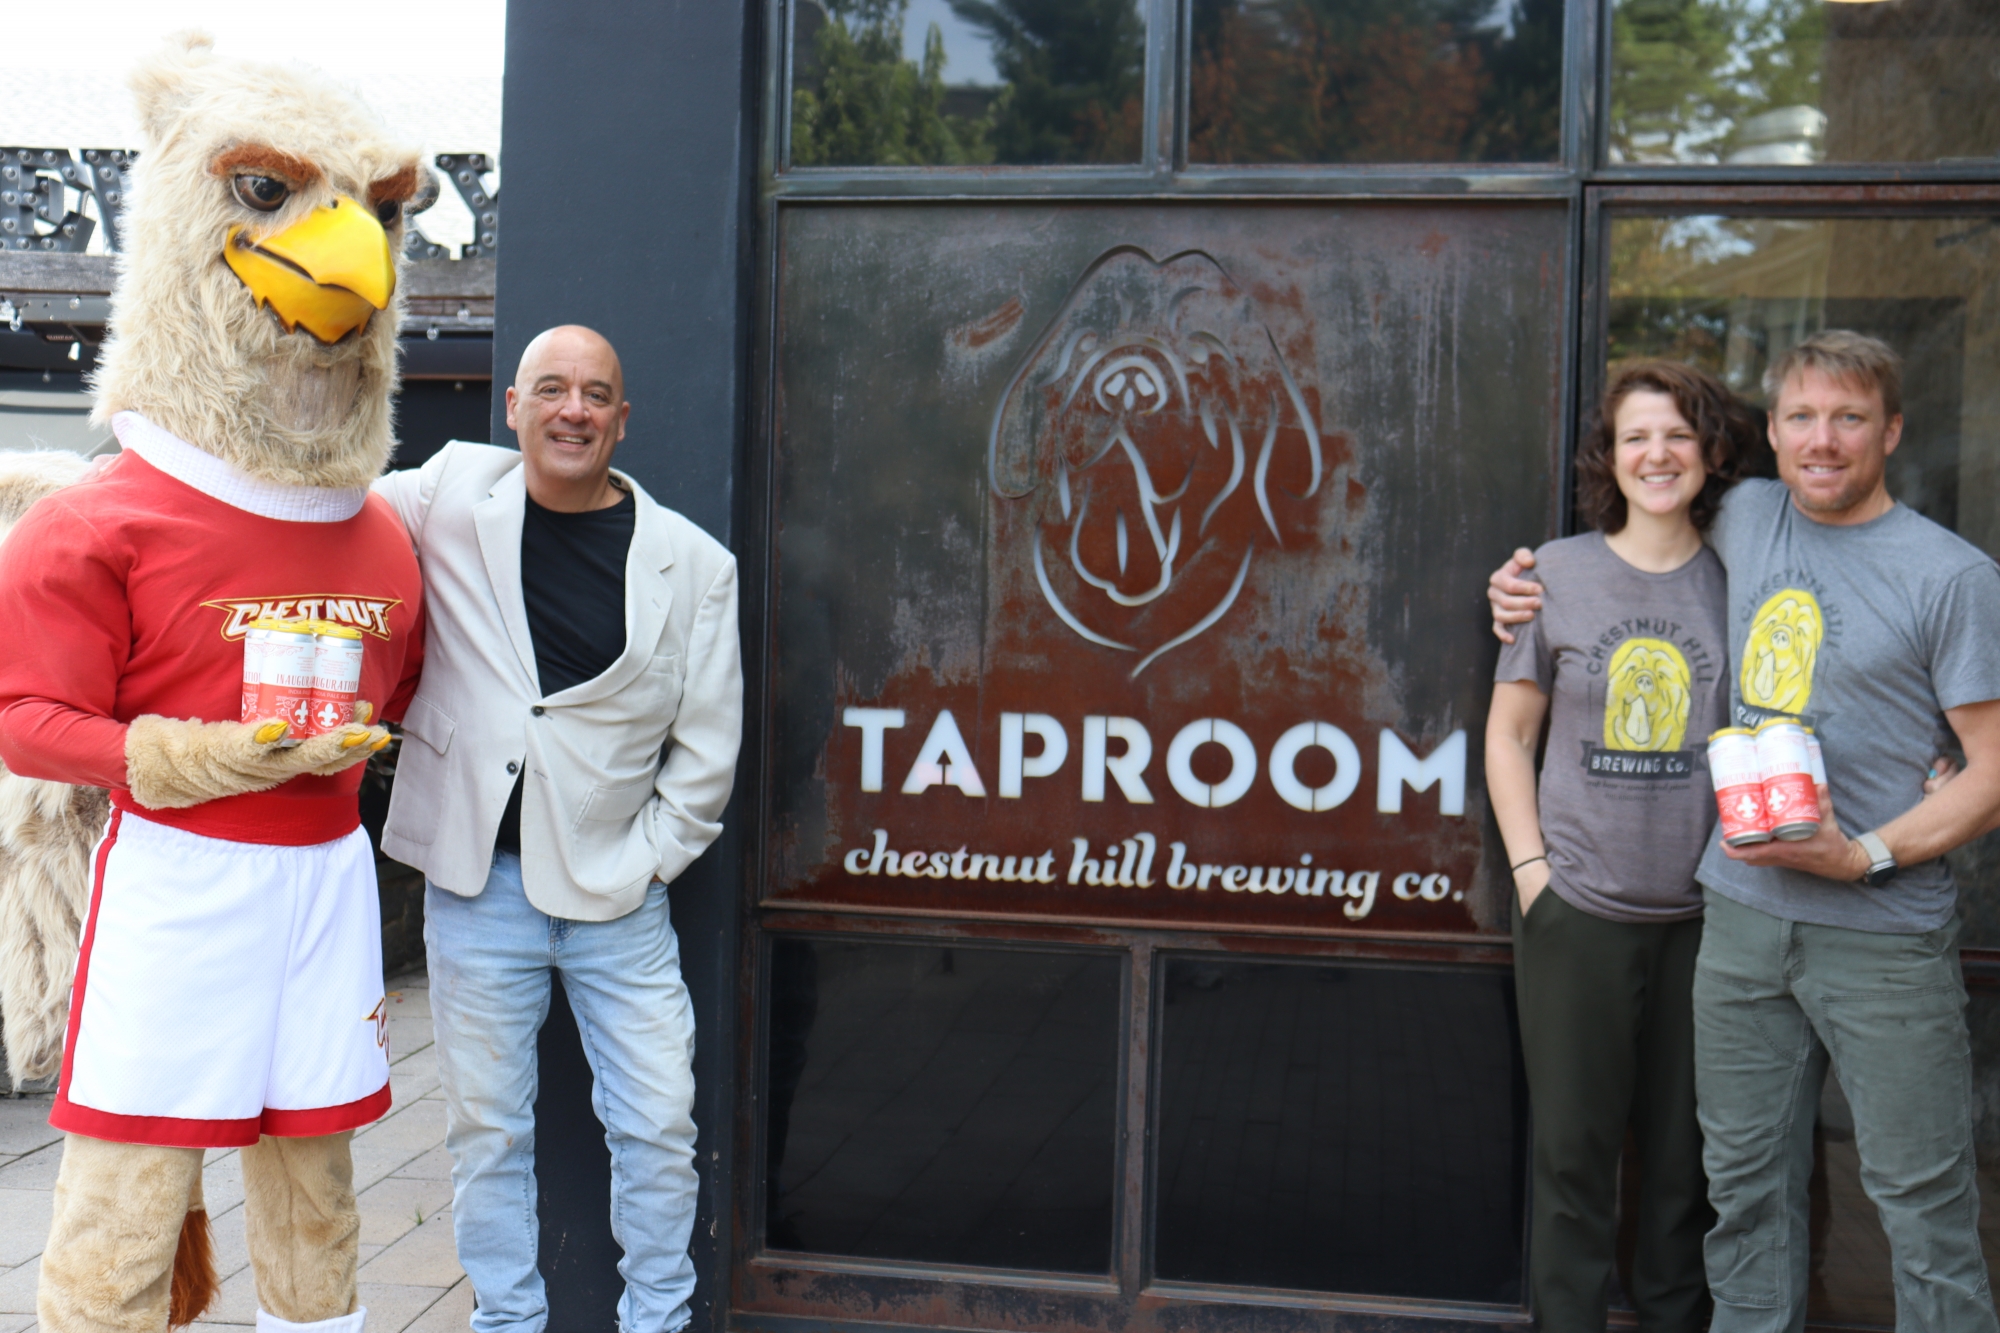 Big Griff and Dr. Latimer joined Chestnut Hill Brewing's Nick Gunderson and Lindsay Pete at the official release of the Inauguration IPA.